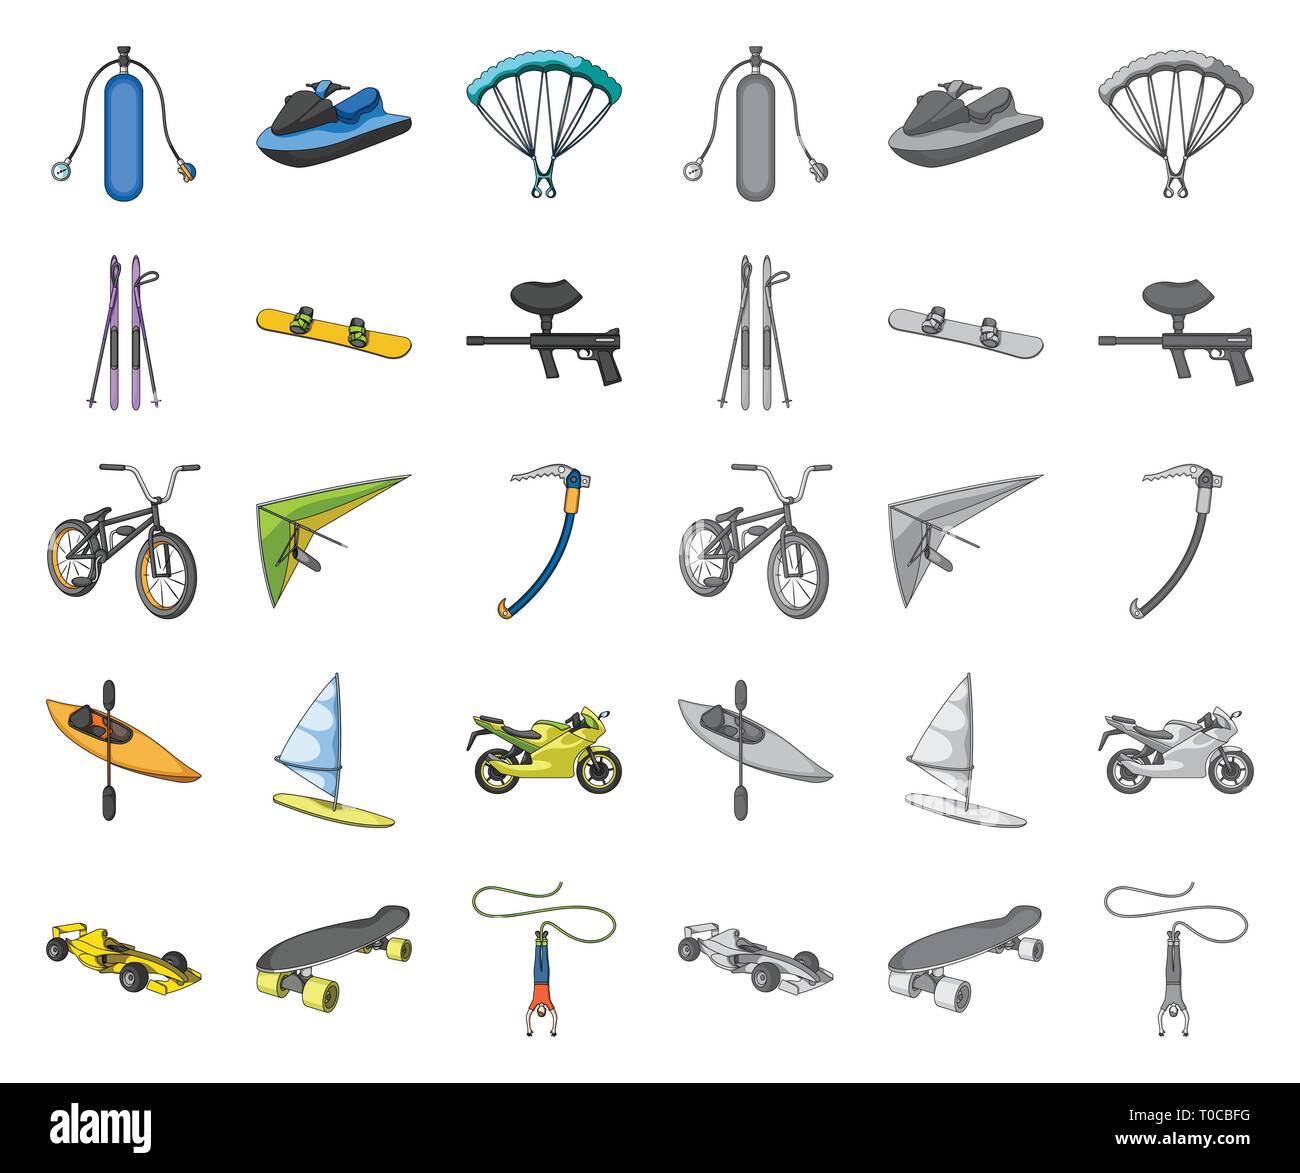 athlete,balloon,bicycle,cartoon,mono,collection,competition,design,different,equipment,extreme,fitness,gliding,gun,hang,hobby,ice,icebreaker,icon,illustration,isolated,kayak,kind,life,logo,machine,motorcycle,oxygen,paintball,parachute,participation,pick,race,sail,scooter,set,sign,skate,skates,ski,snowboard,sport,symbol,vector,water,weapon,web Vector Vectors , Stock Vector